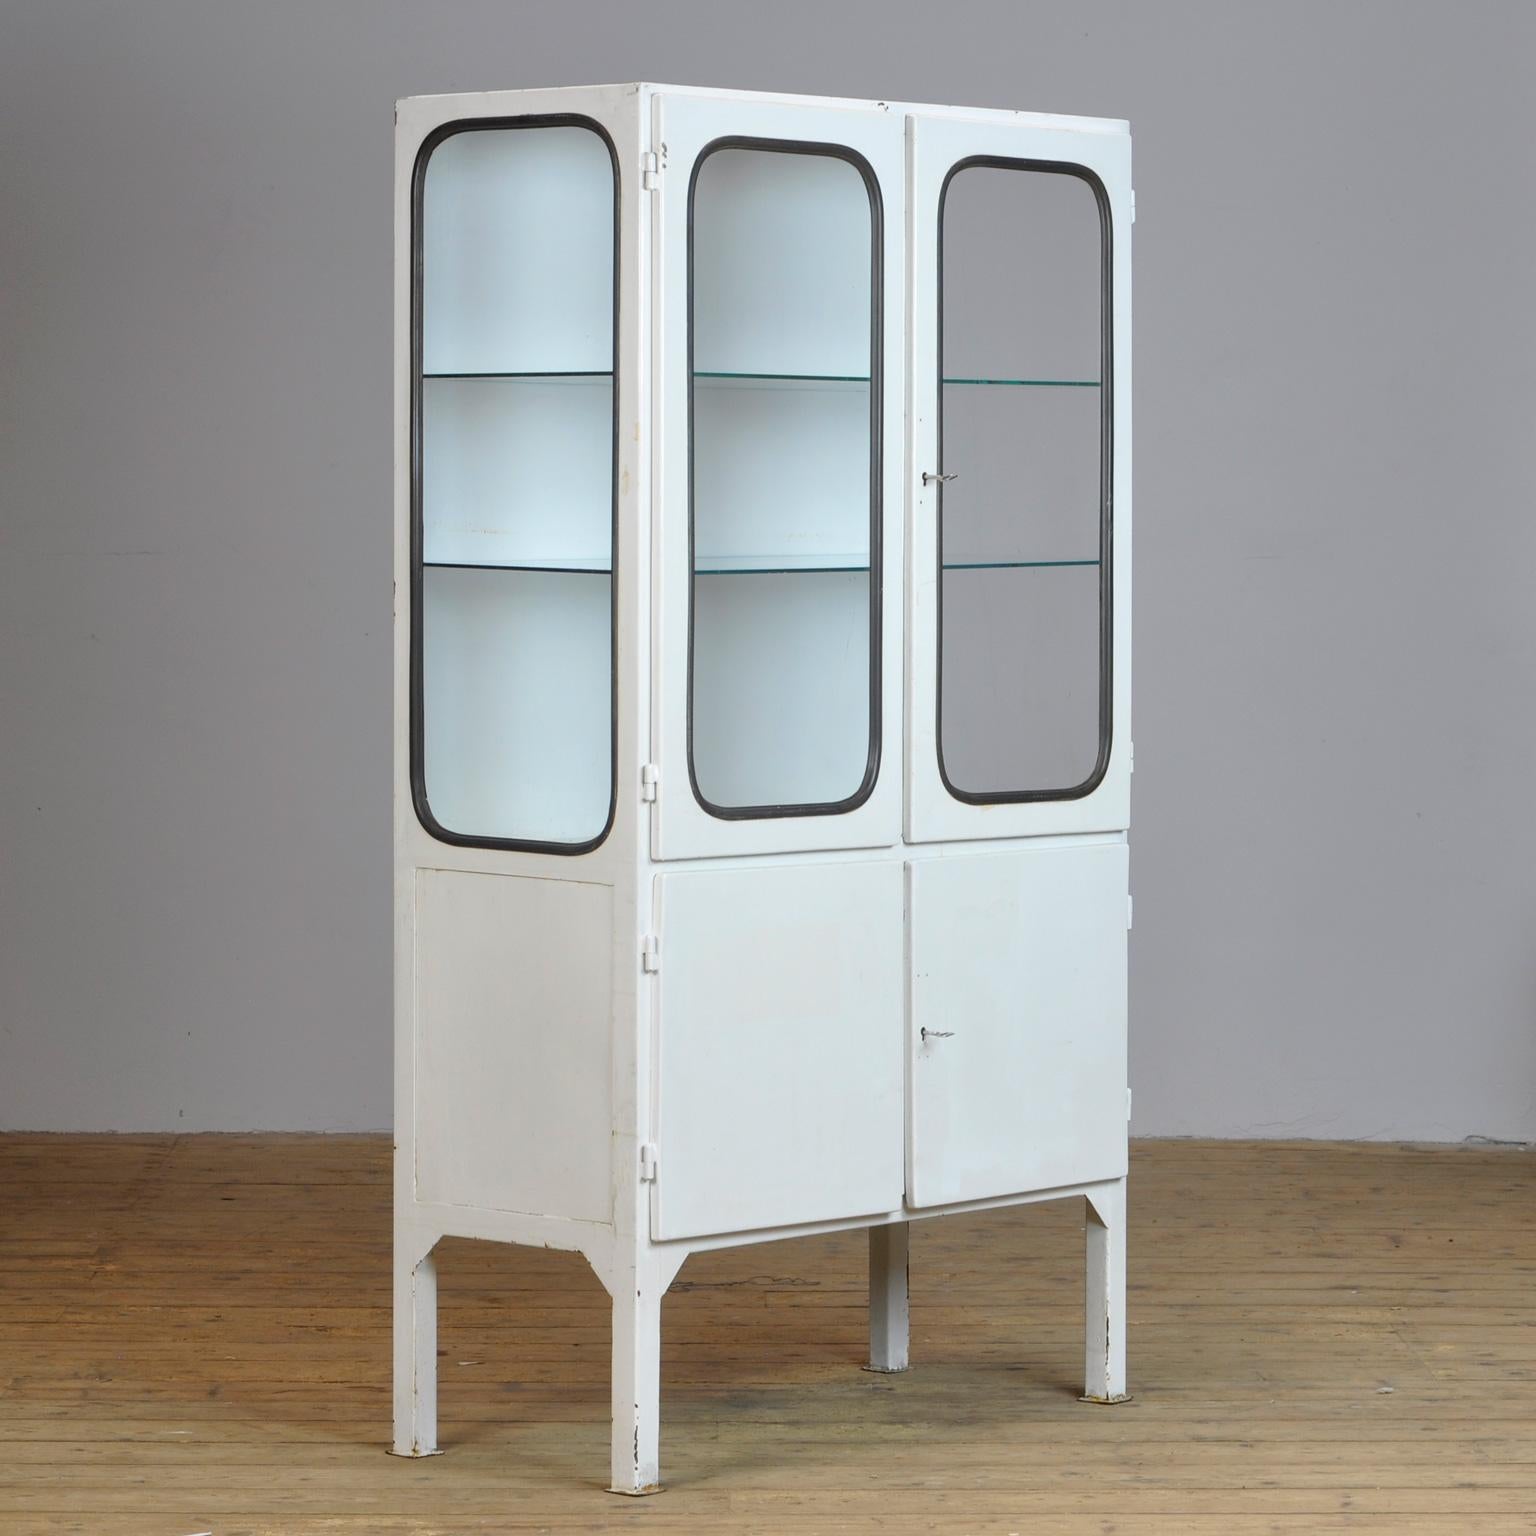 This medical cabinet was designed in the 1970s and was produced circa 1975 in Hungary. It is made from iron and glass, and the glass is held by a black rubber strip. The cabinet features two adjustable glass shelves and functioning locks.
  